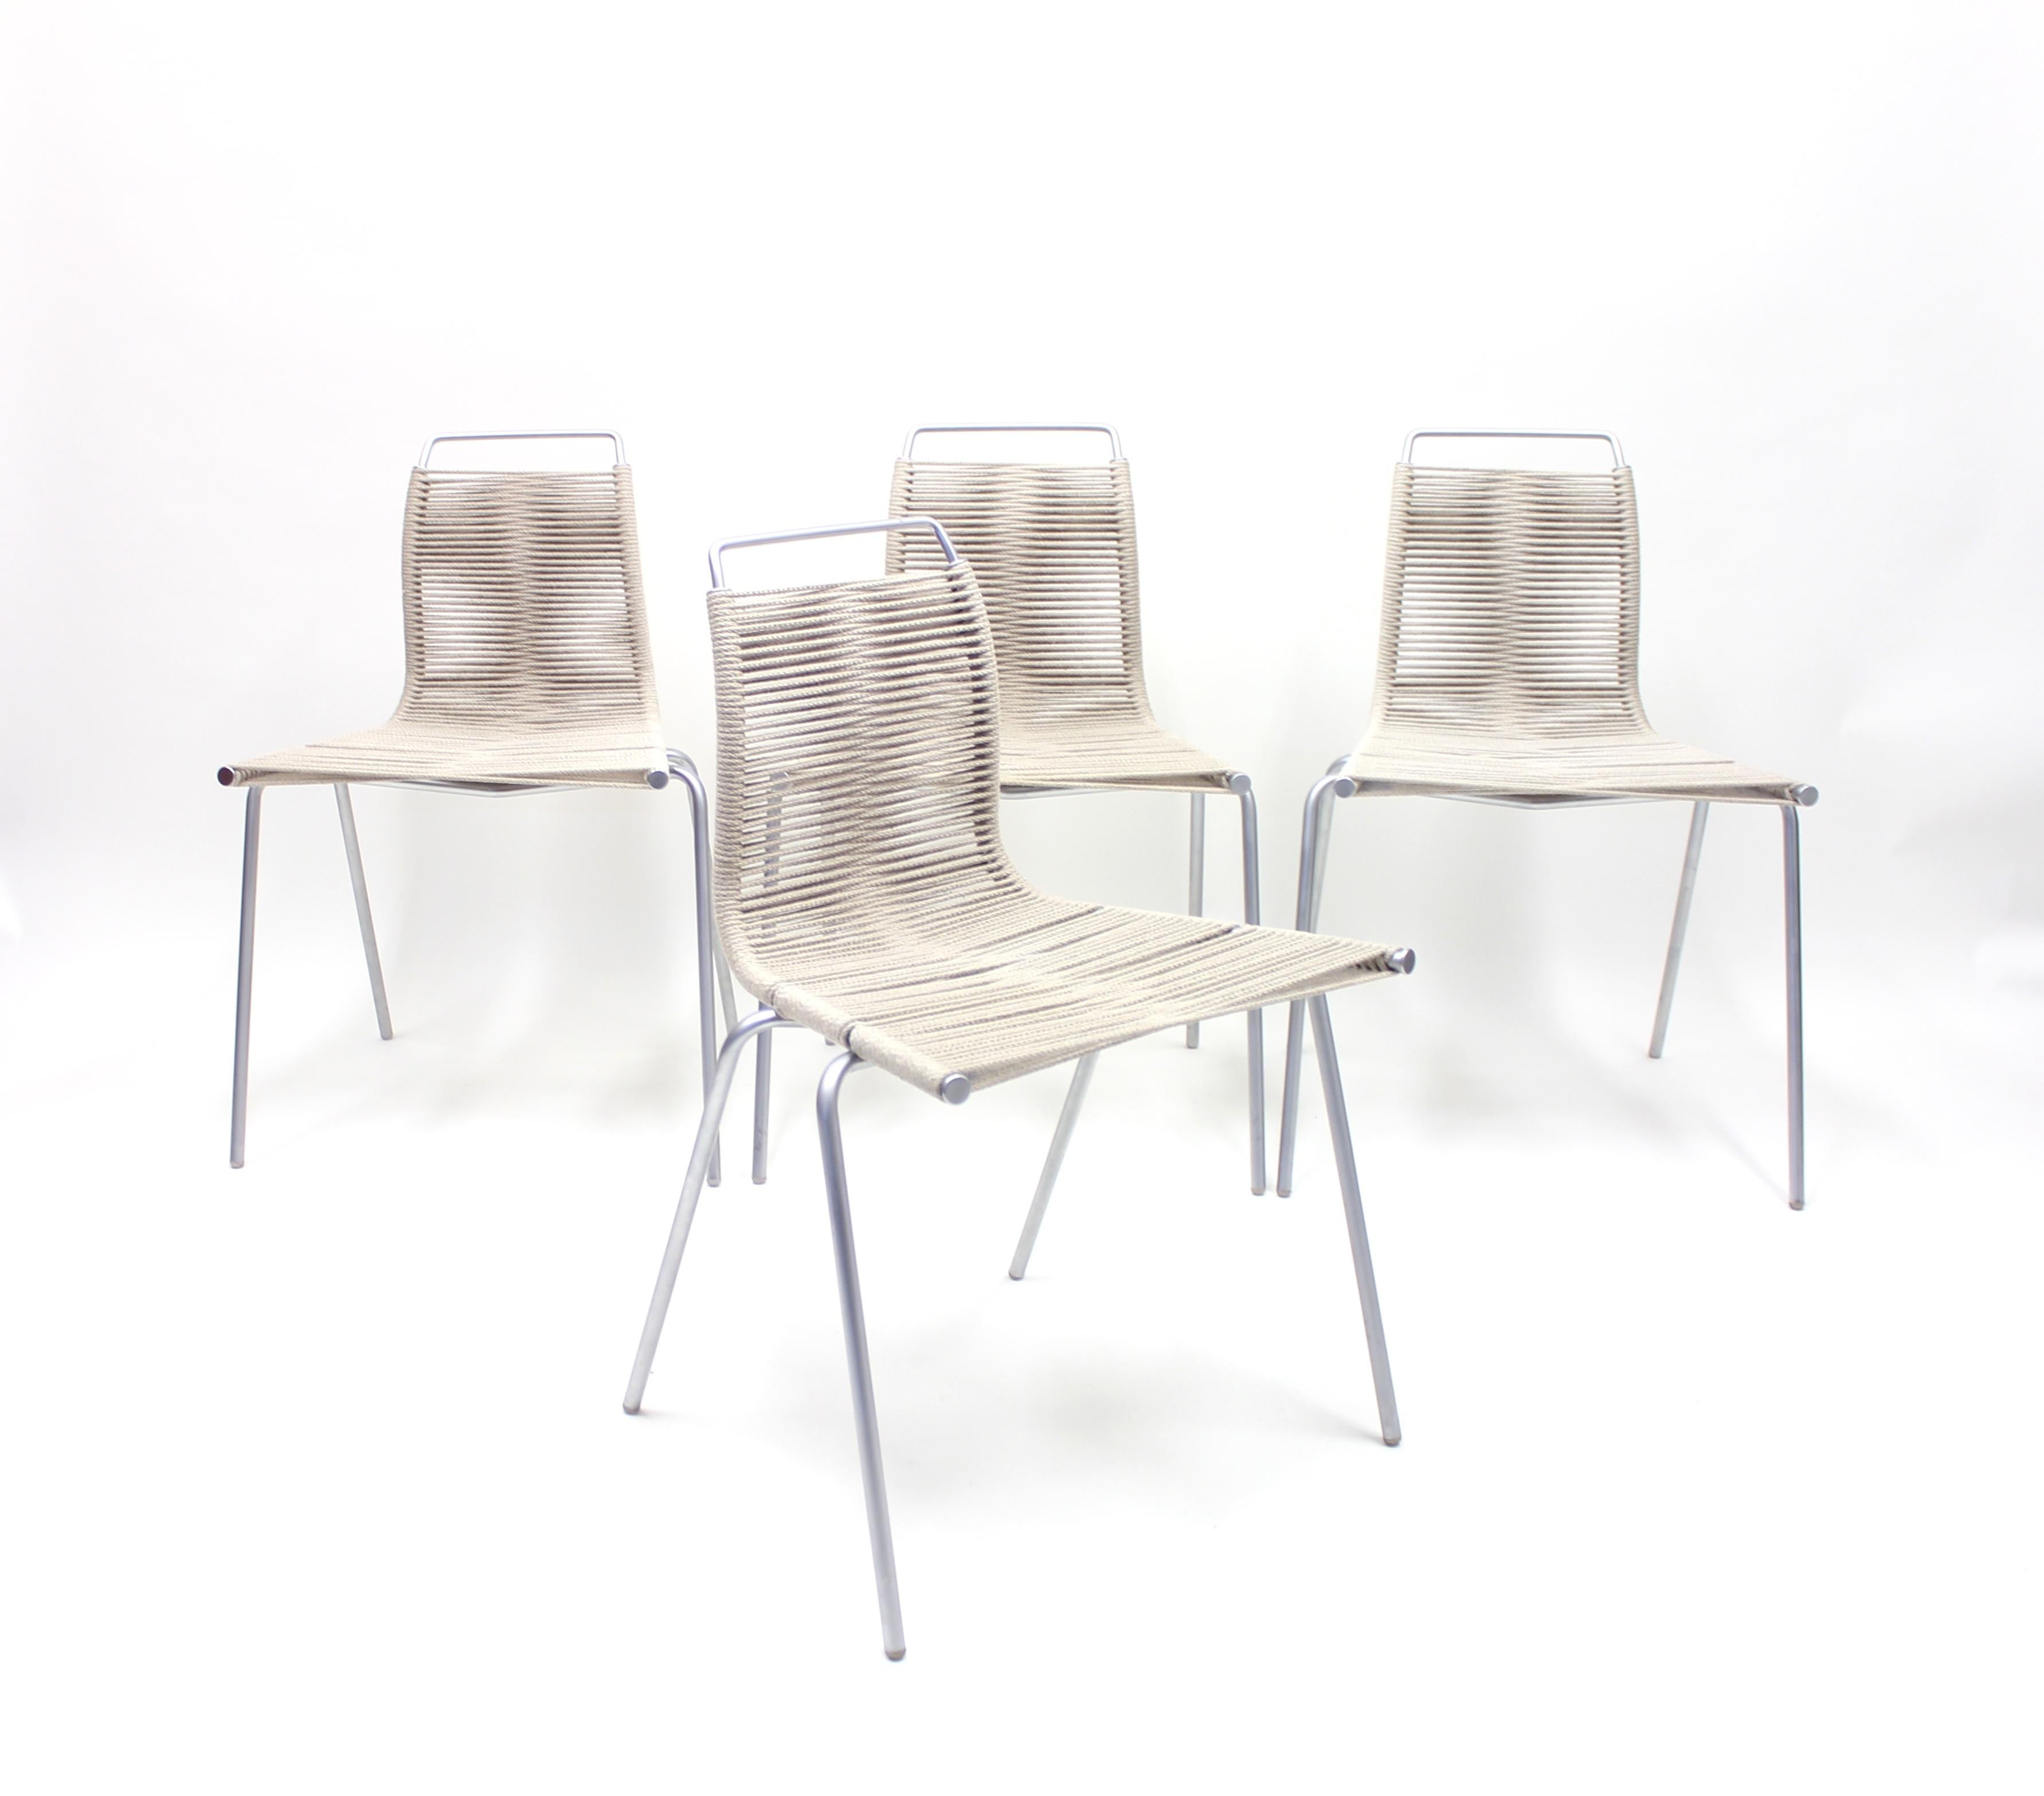 Set of four PK1 chairs designed by Poul Kjærholm and recently manufactured under licence by Thorsen Møbler in Denmark. Aluminium frame with rope seat and back. Very good condition.